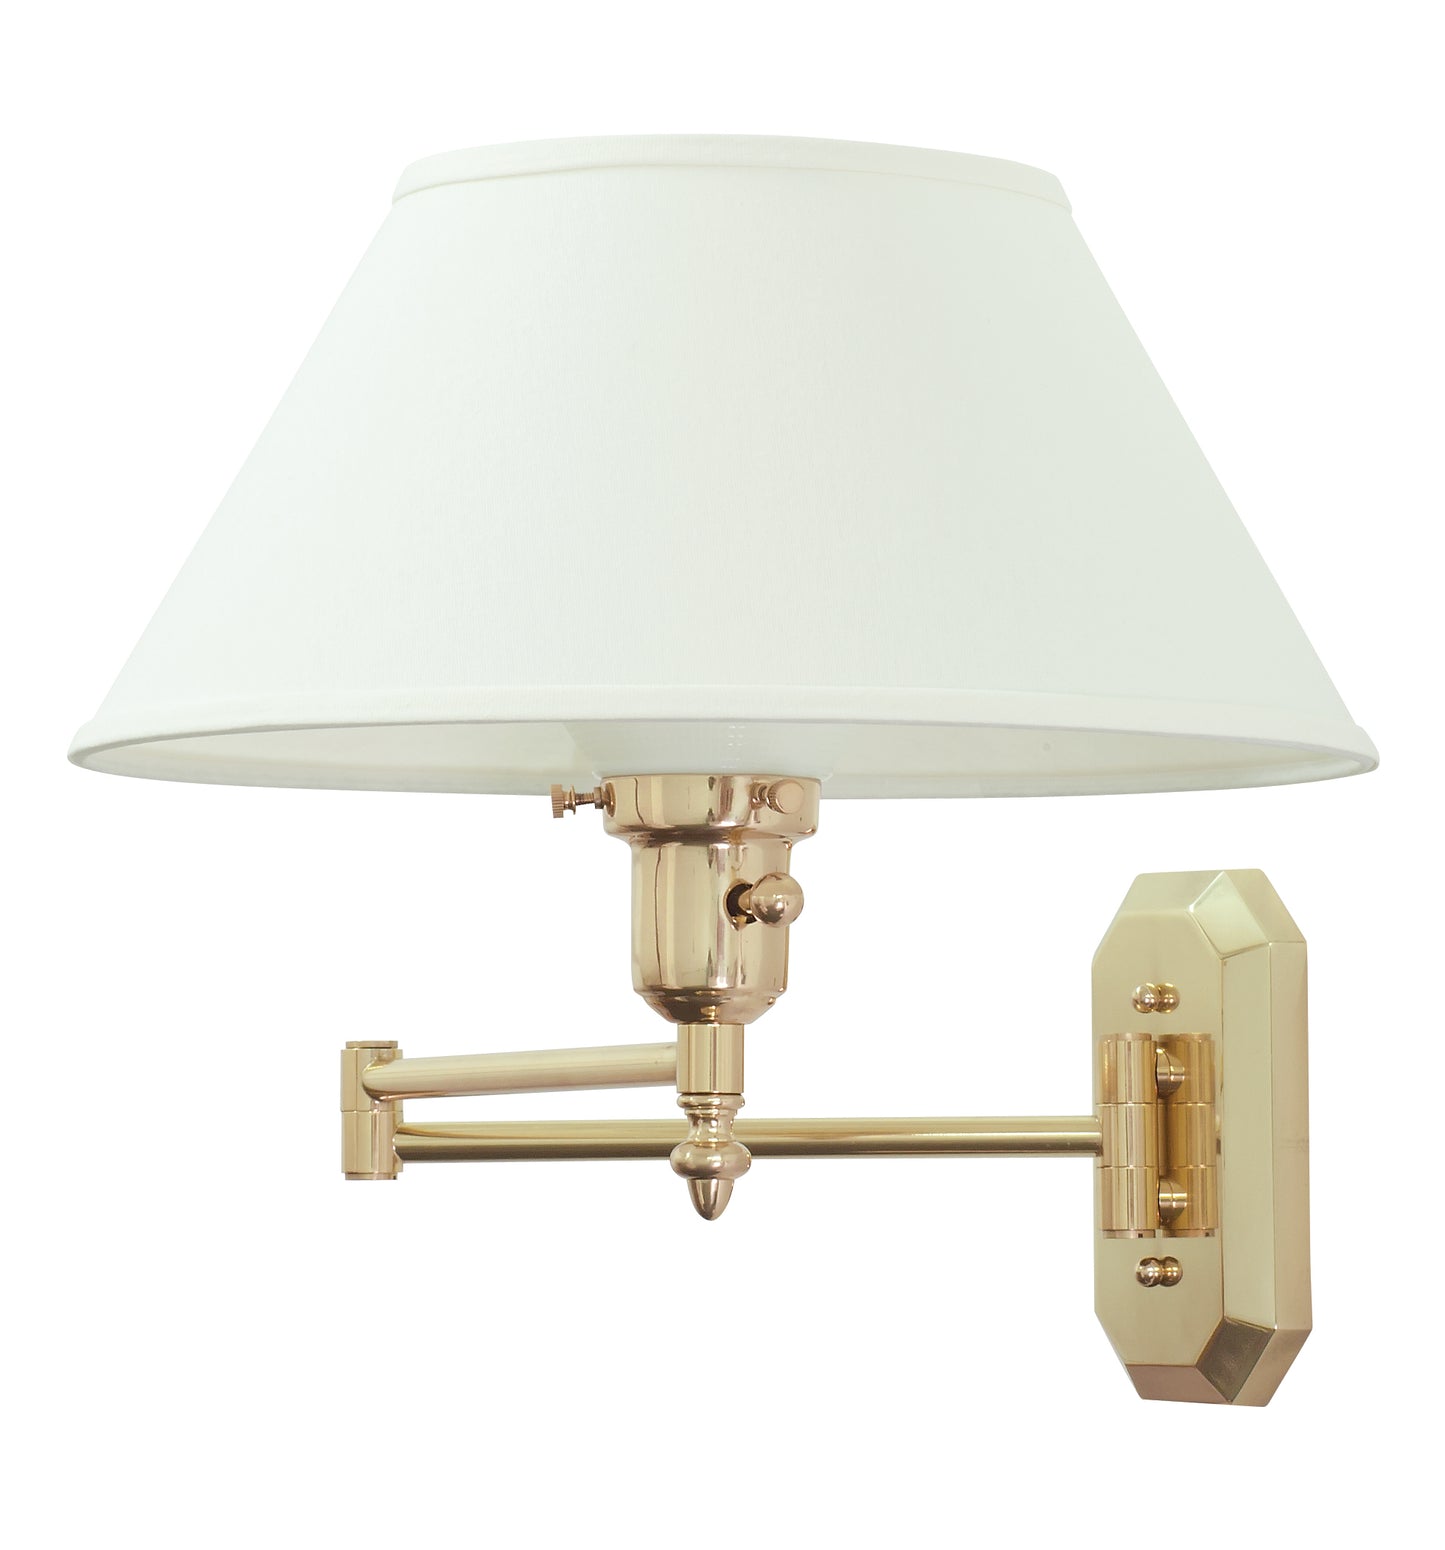 House of Troy Wall Swing Arm Lamp in Polished Brass WS-704